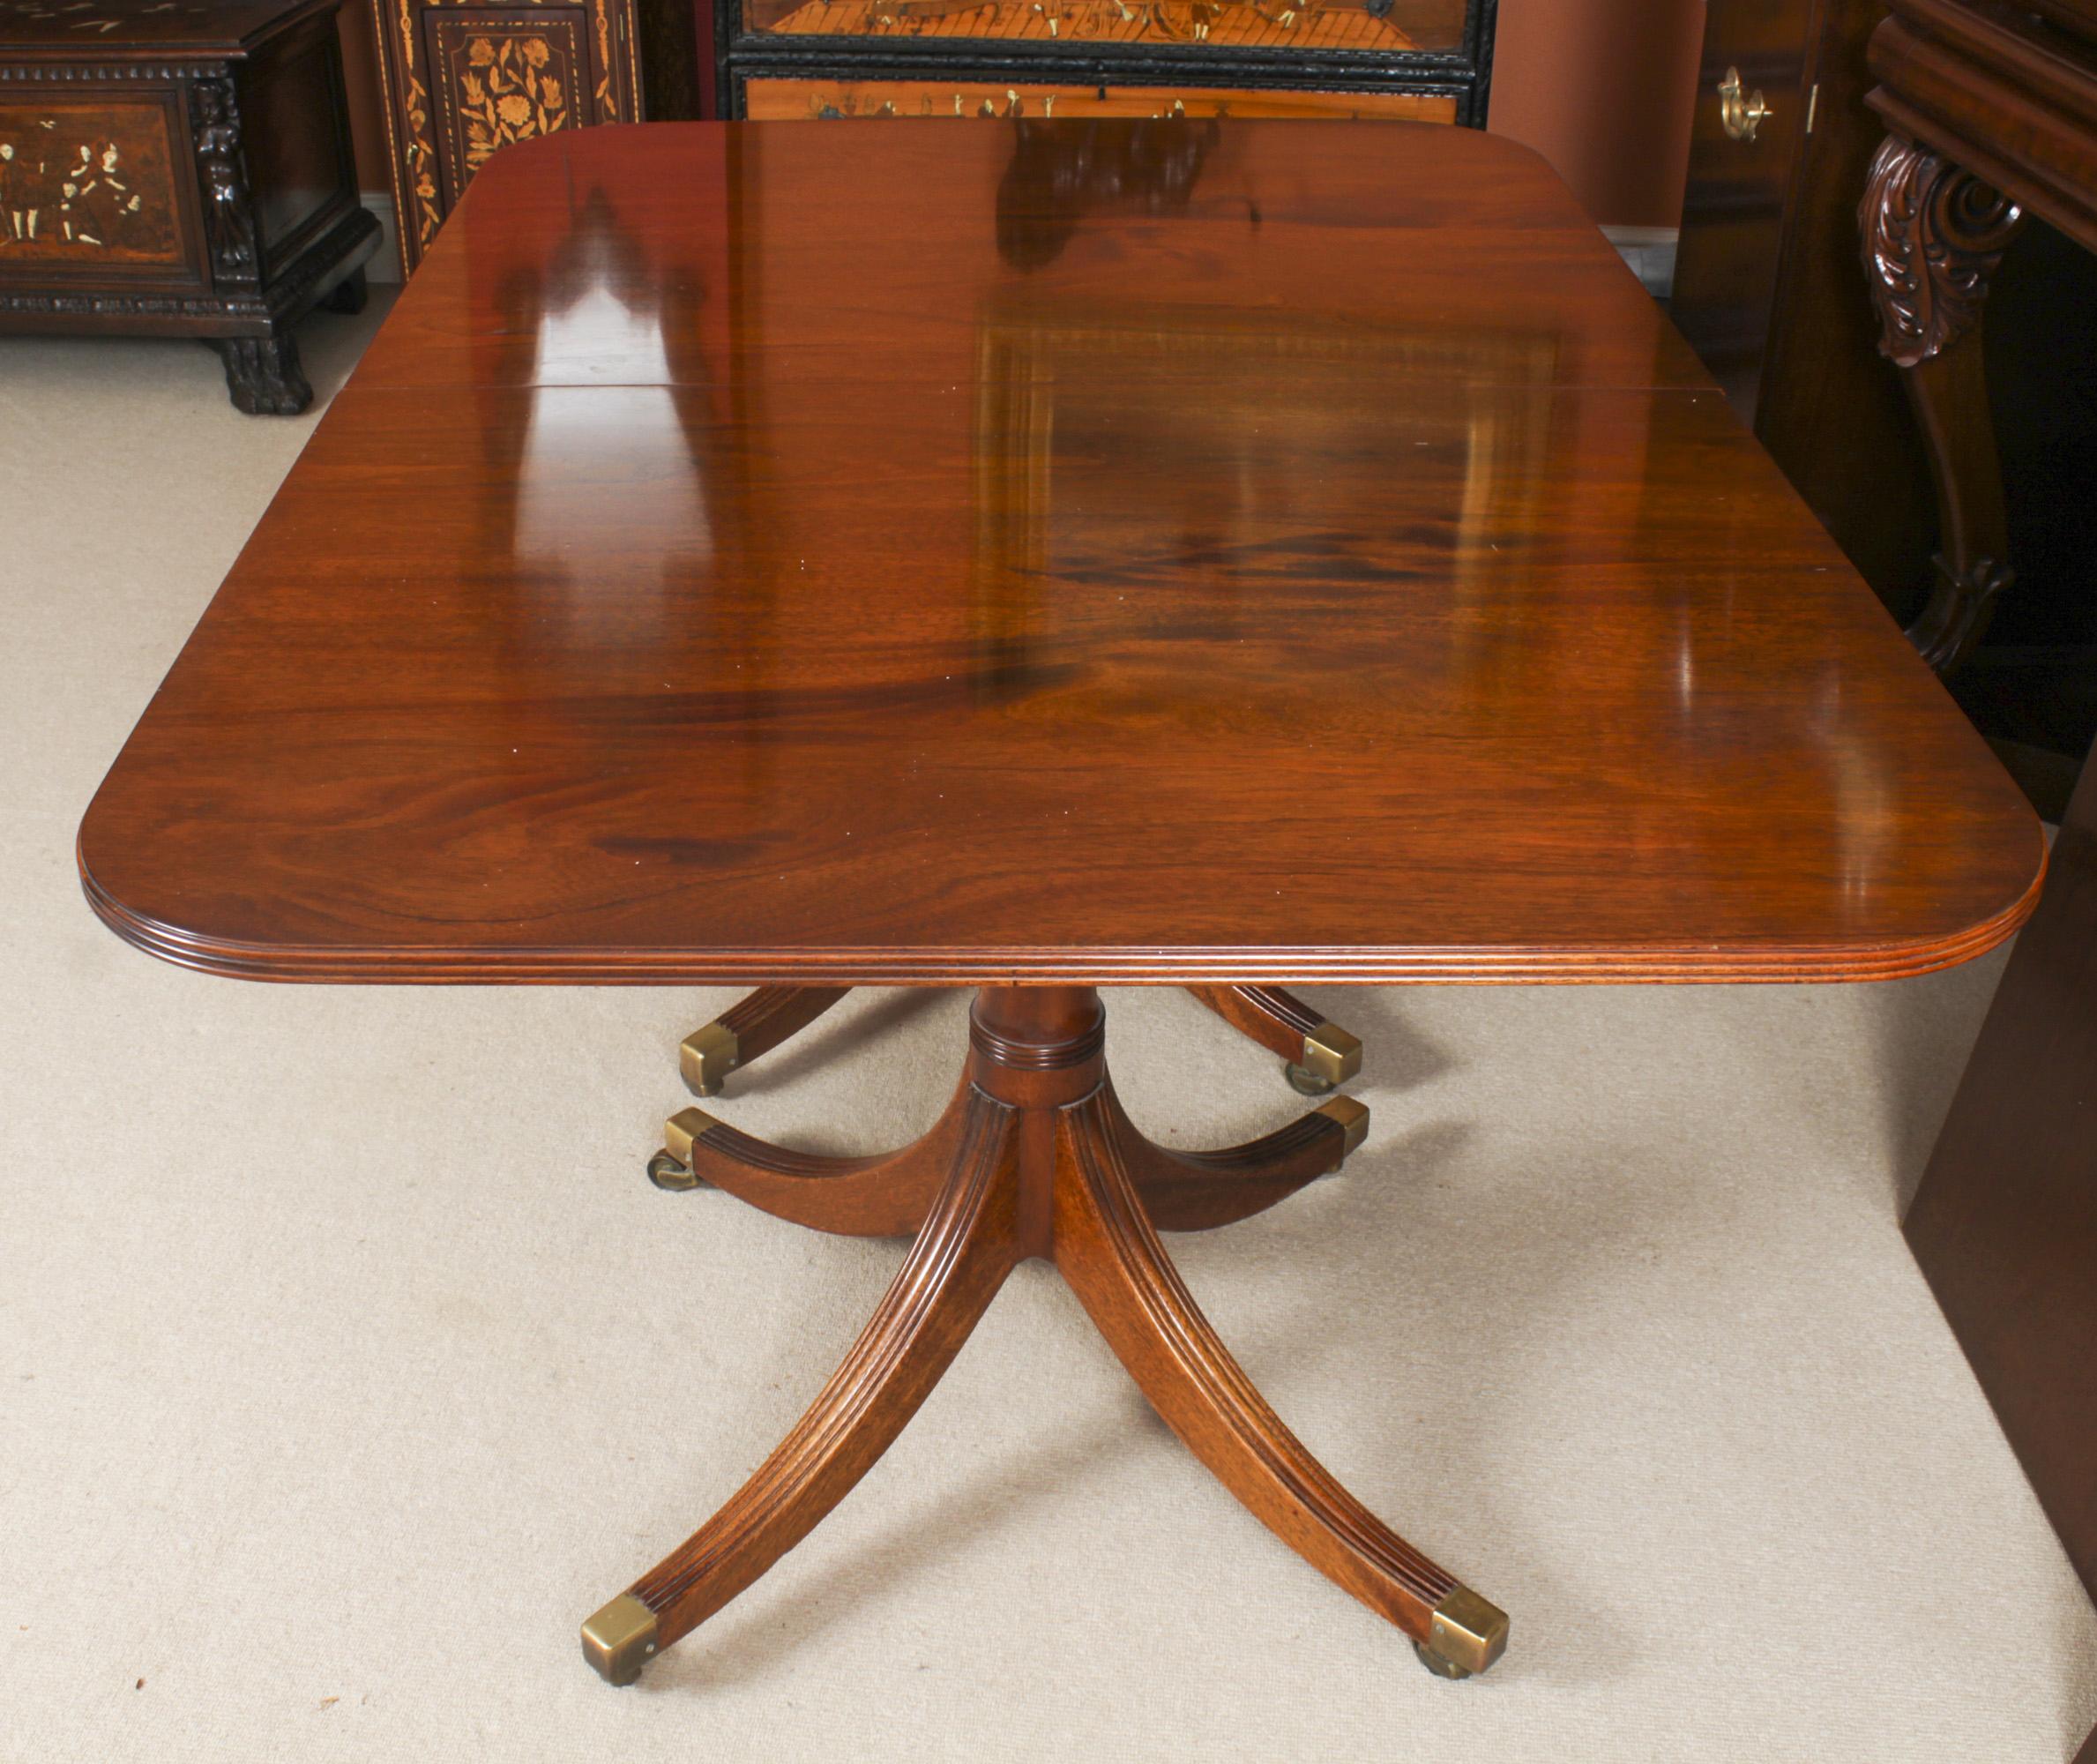 Regency Revival Vintage Twin Pillar Dining Table & 10 dining chairs by William Tillman 20th C